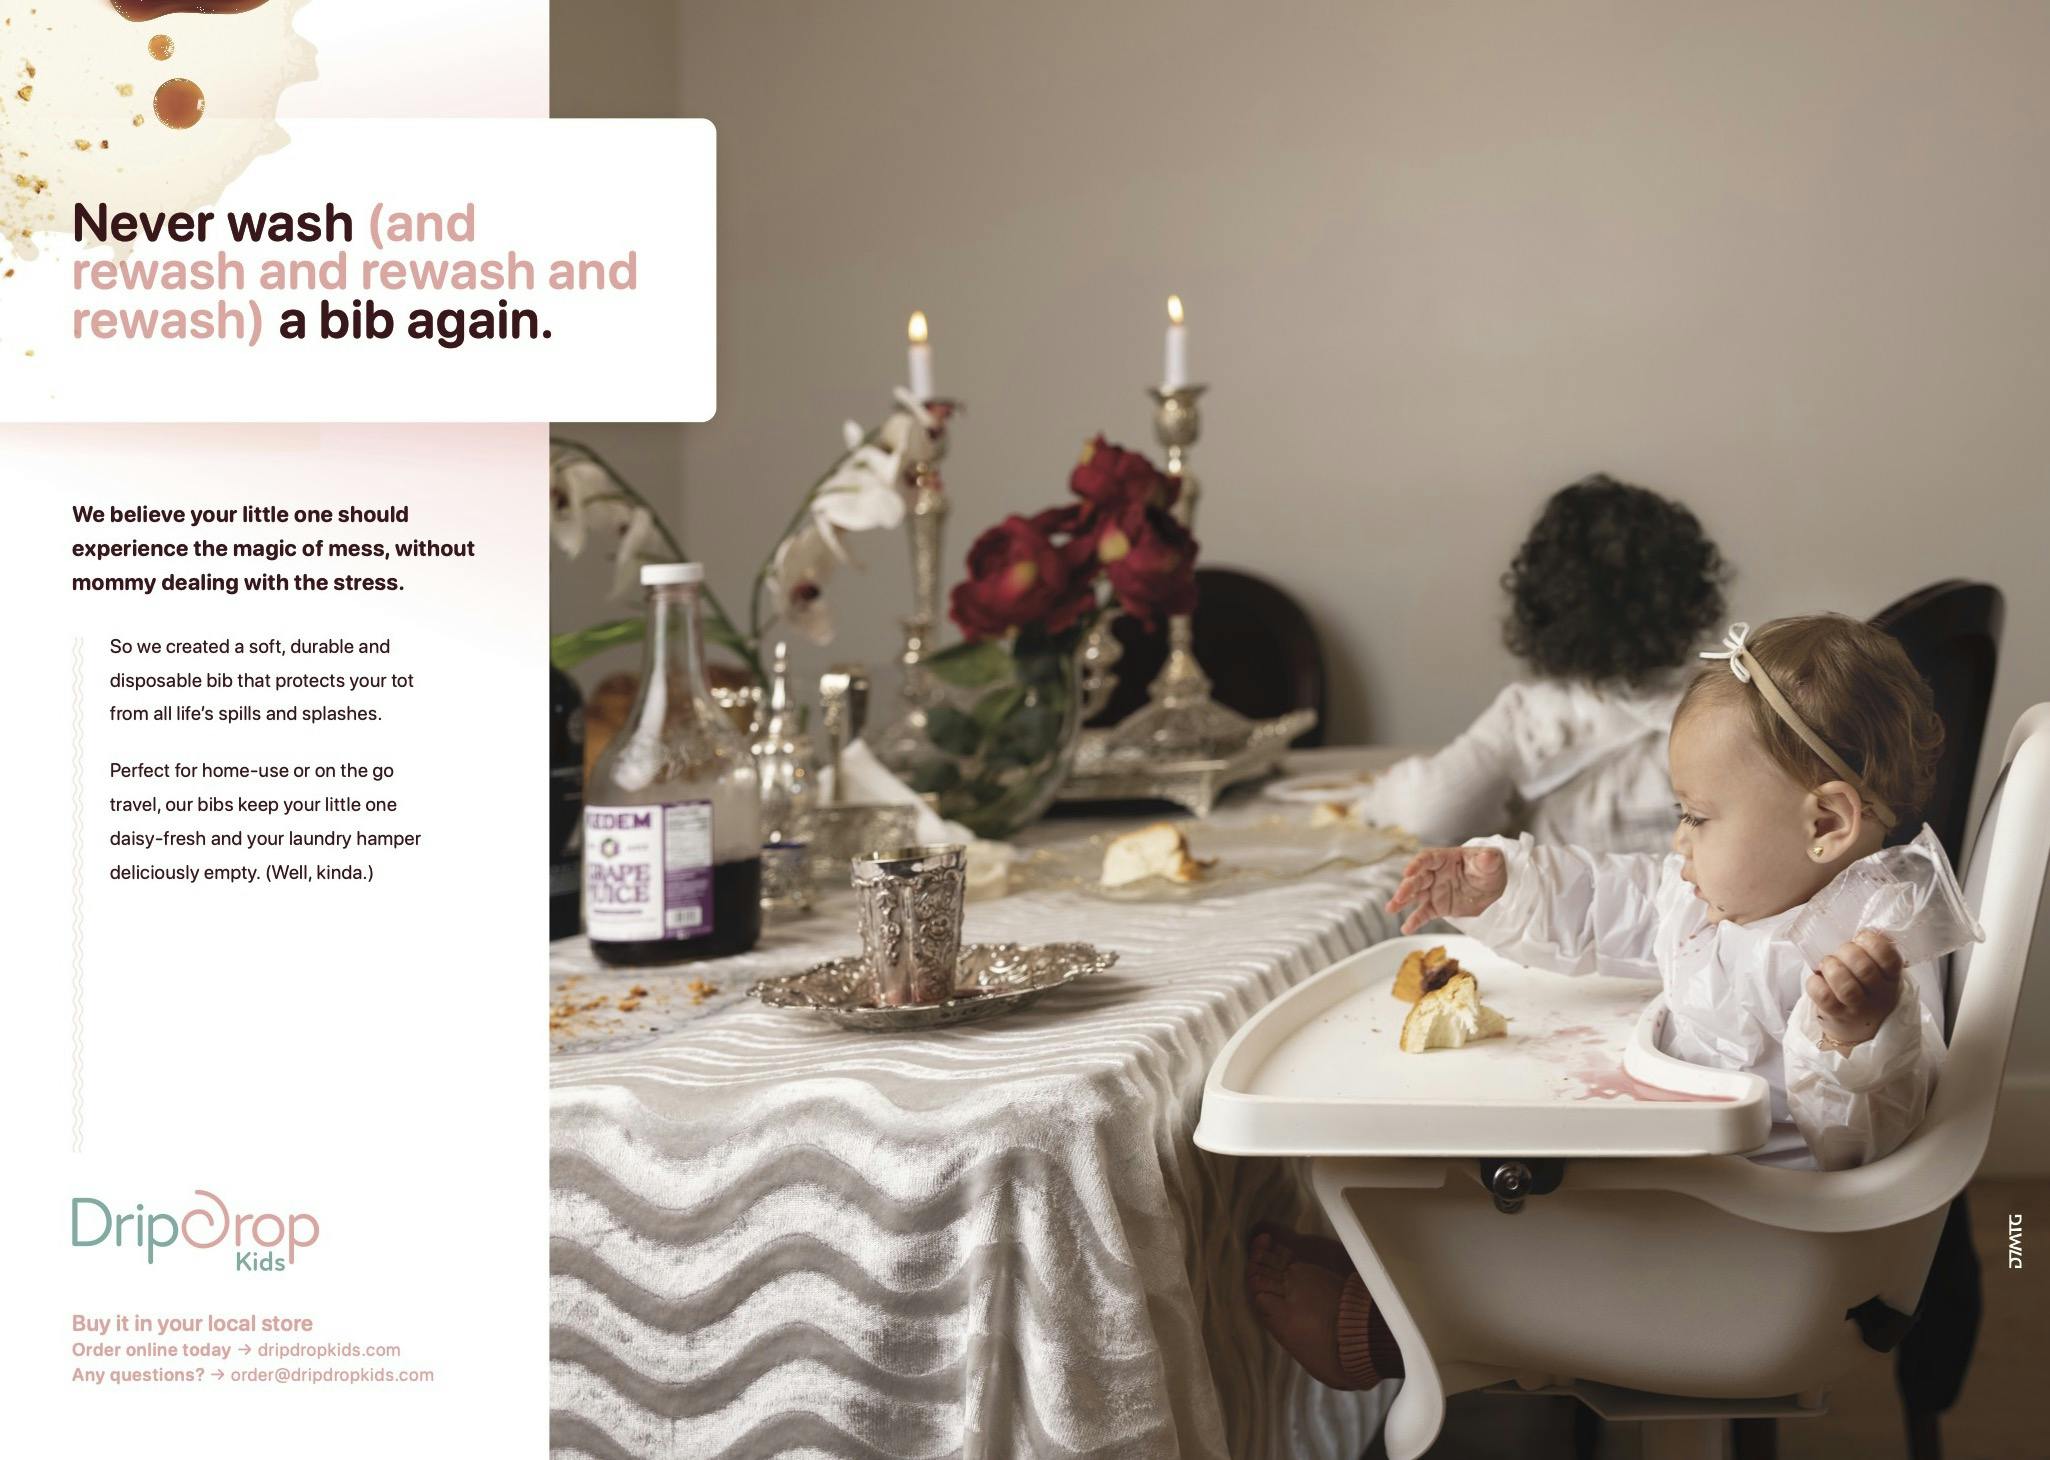 Advertisement for DripDrop Kids product for Bambino maternity magazine